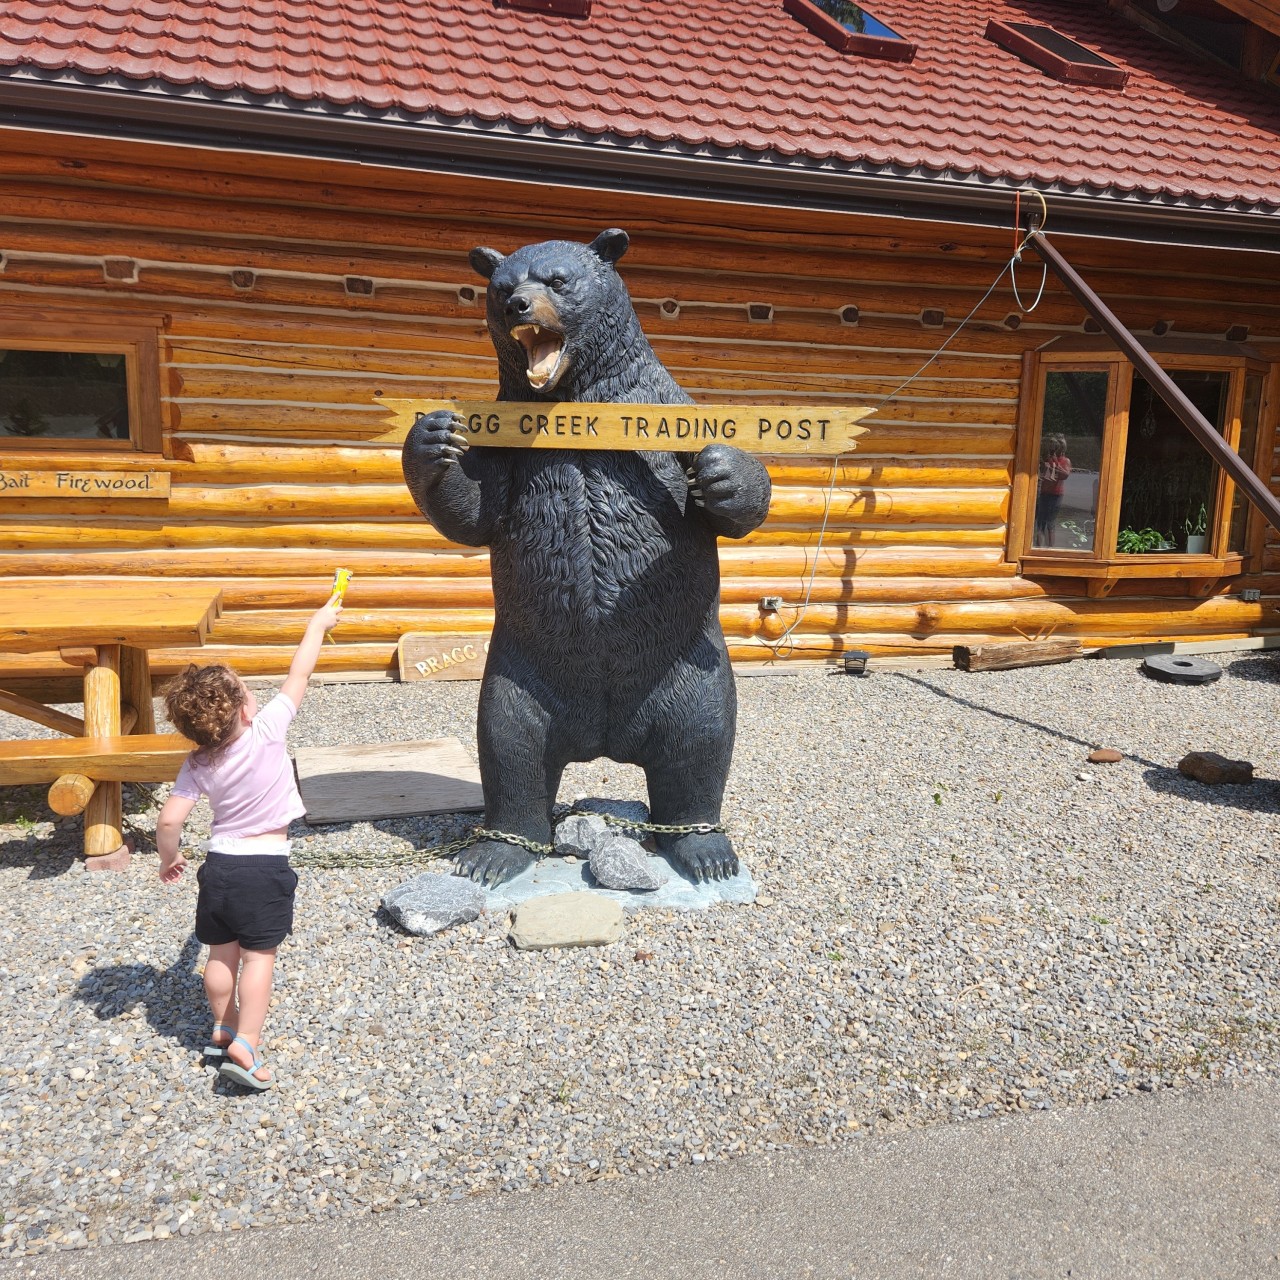 Would You Like Some Ice-cream? - Such a generous little human. Even offering the bear some of her treat